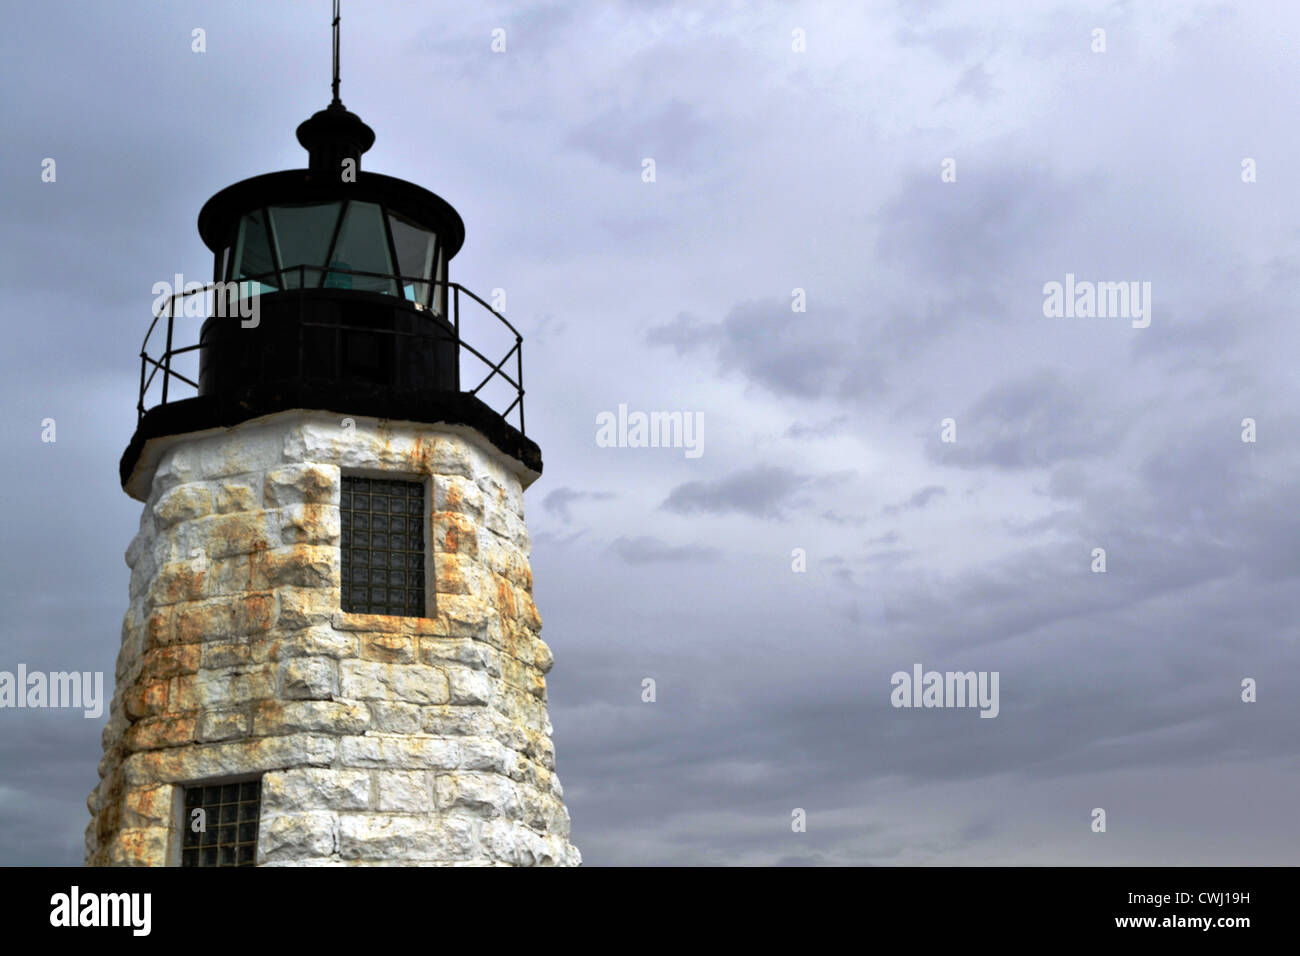 The Goat Island Lighthouse stands against a clouded sky Stock Photo